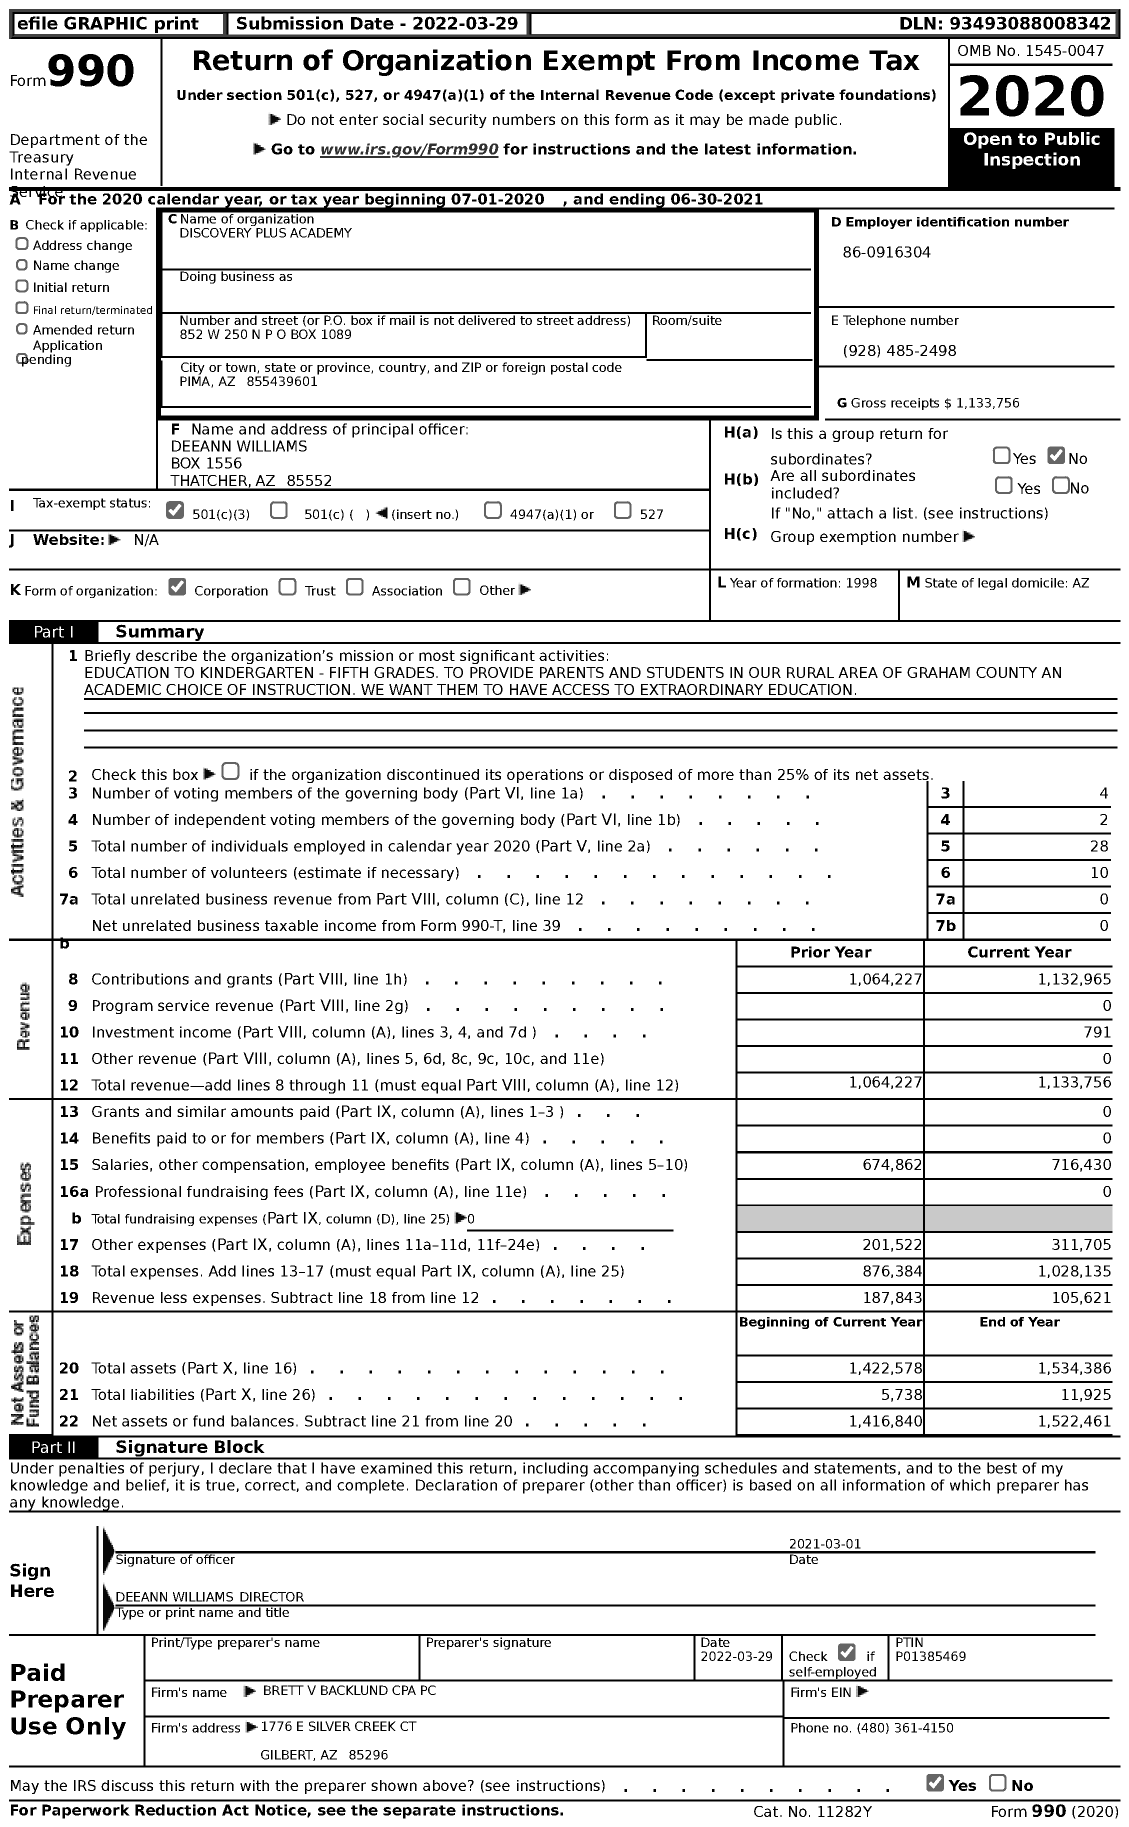 Image of first page of 2020 Form 990 for Discovery Plus Academy